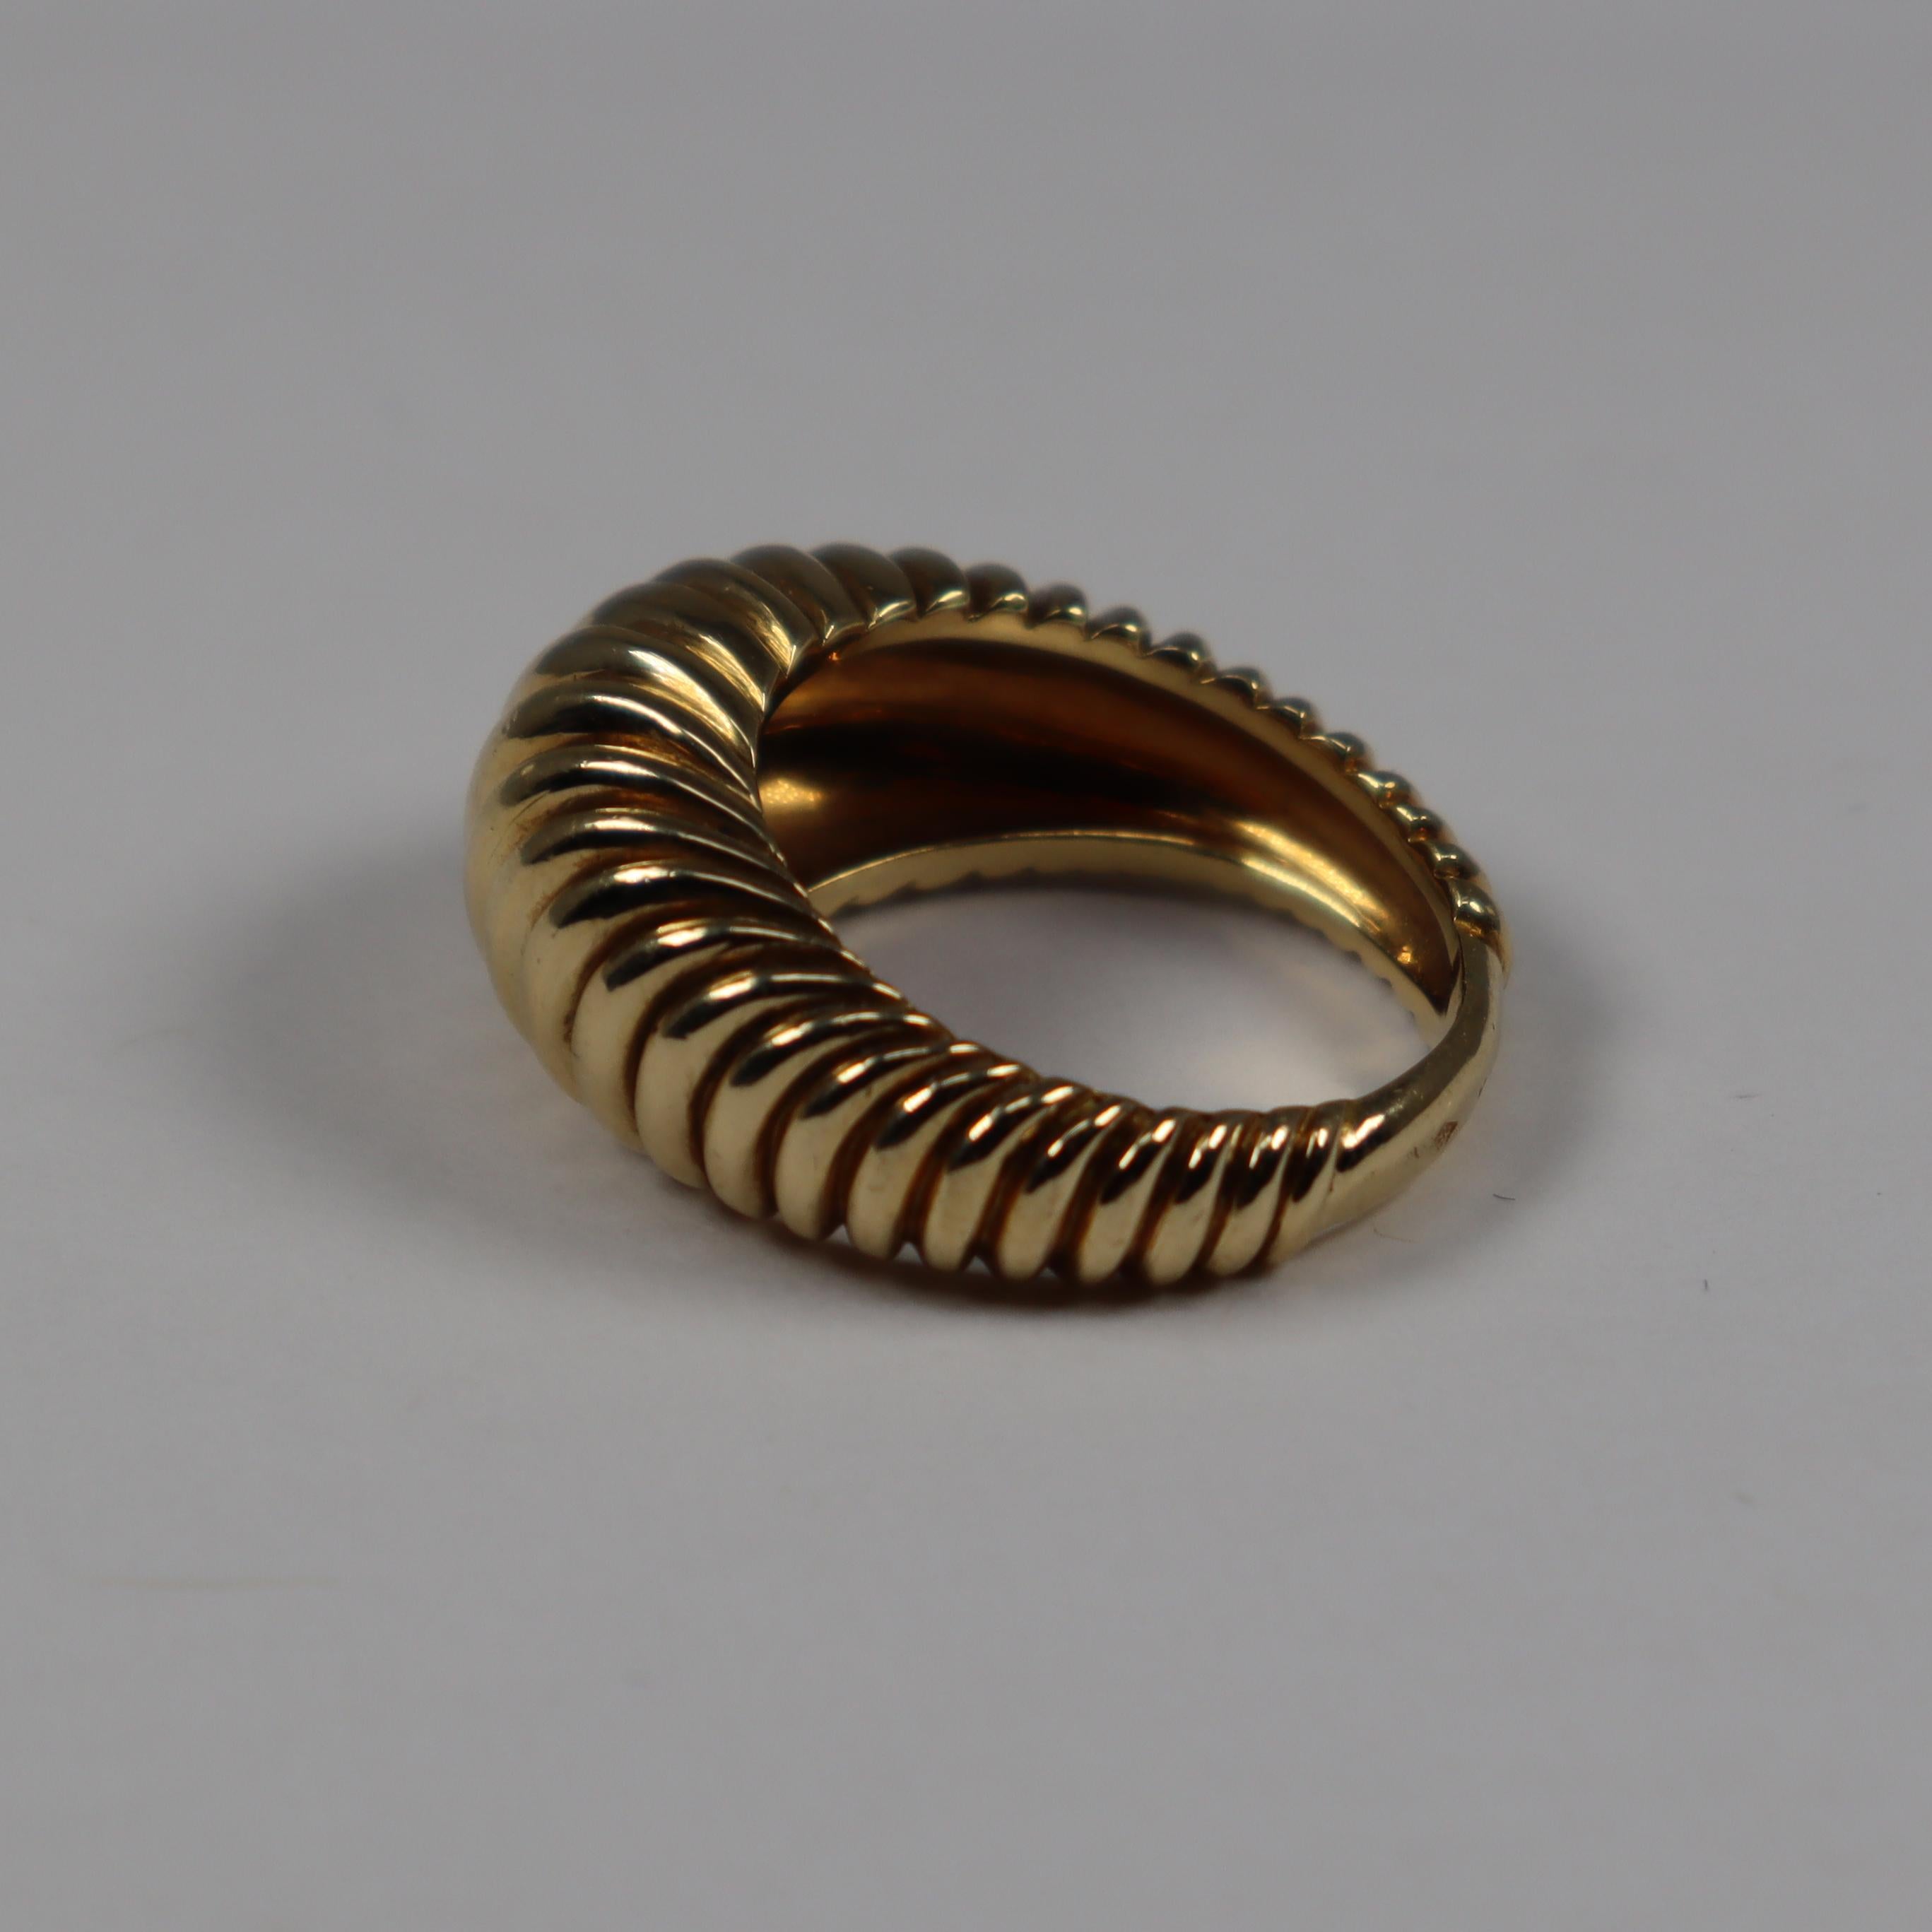 In the classic Shrimp style, this 18 karat yellow gold ring is timeless!